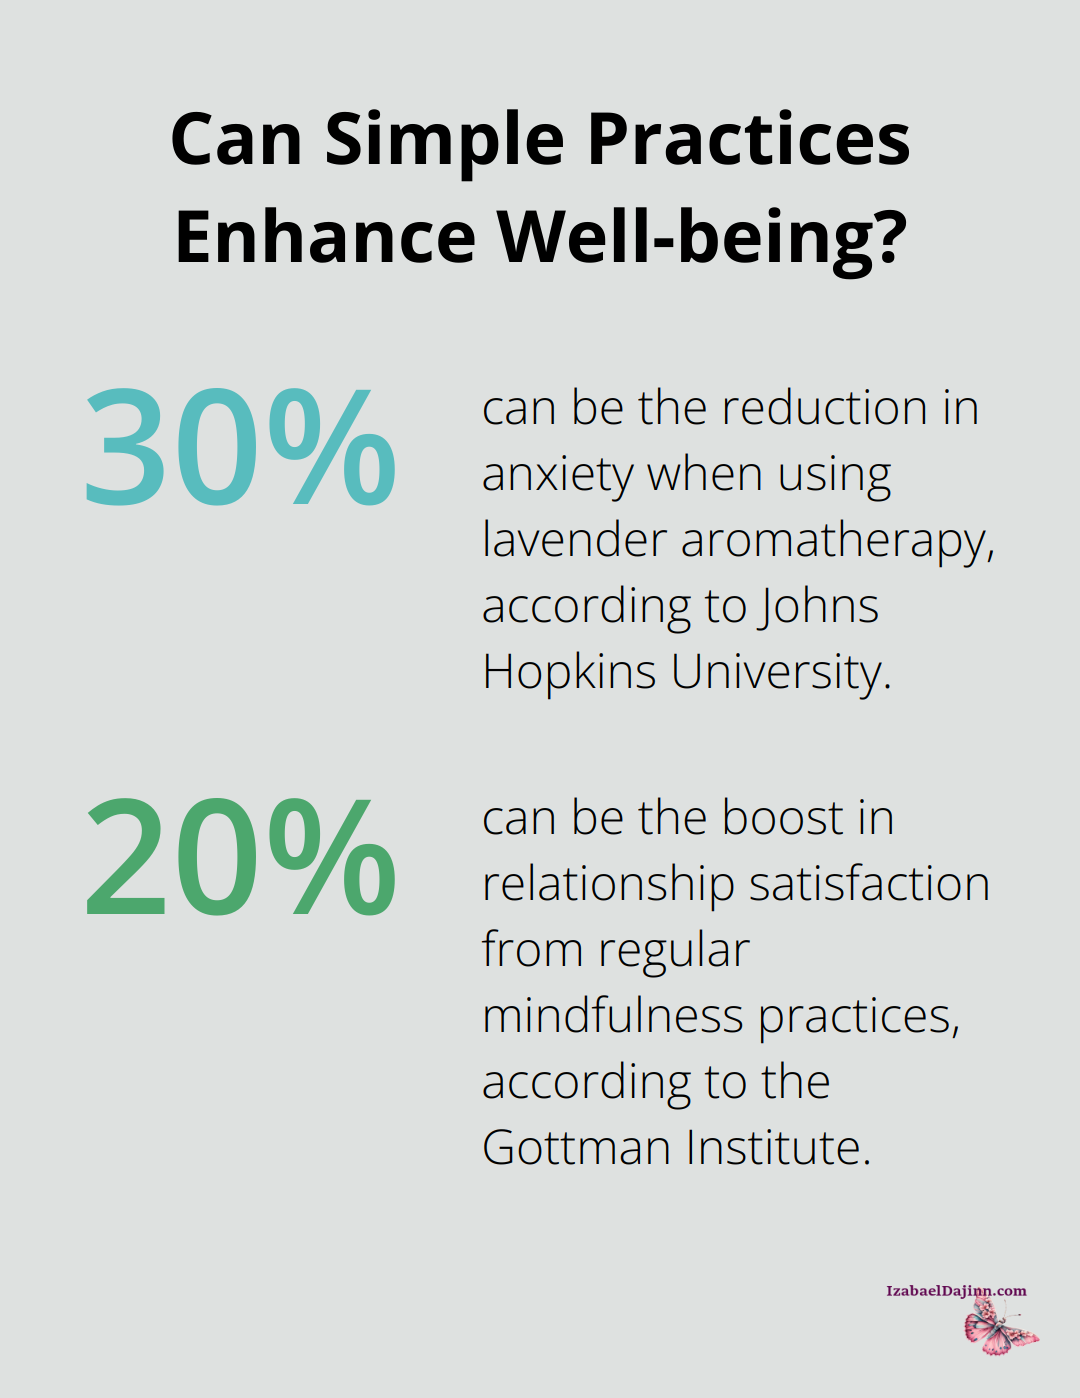 Fact - Can Simple Practices Enhance Well-being?